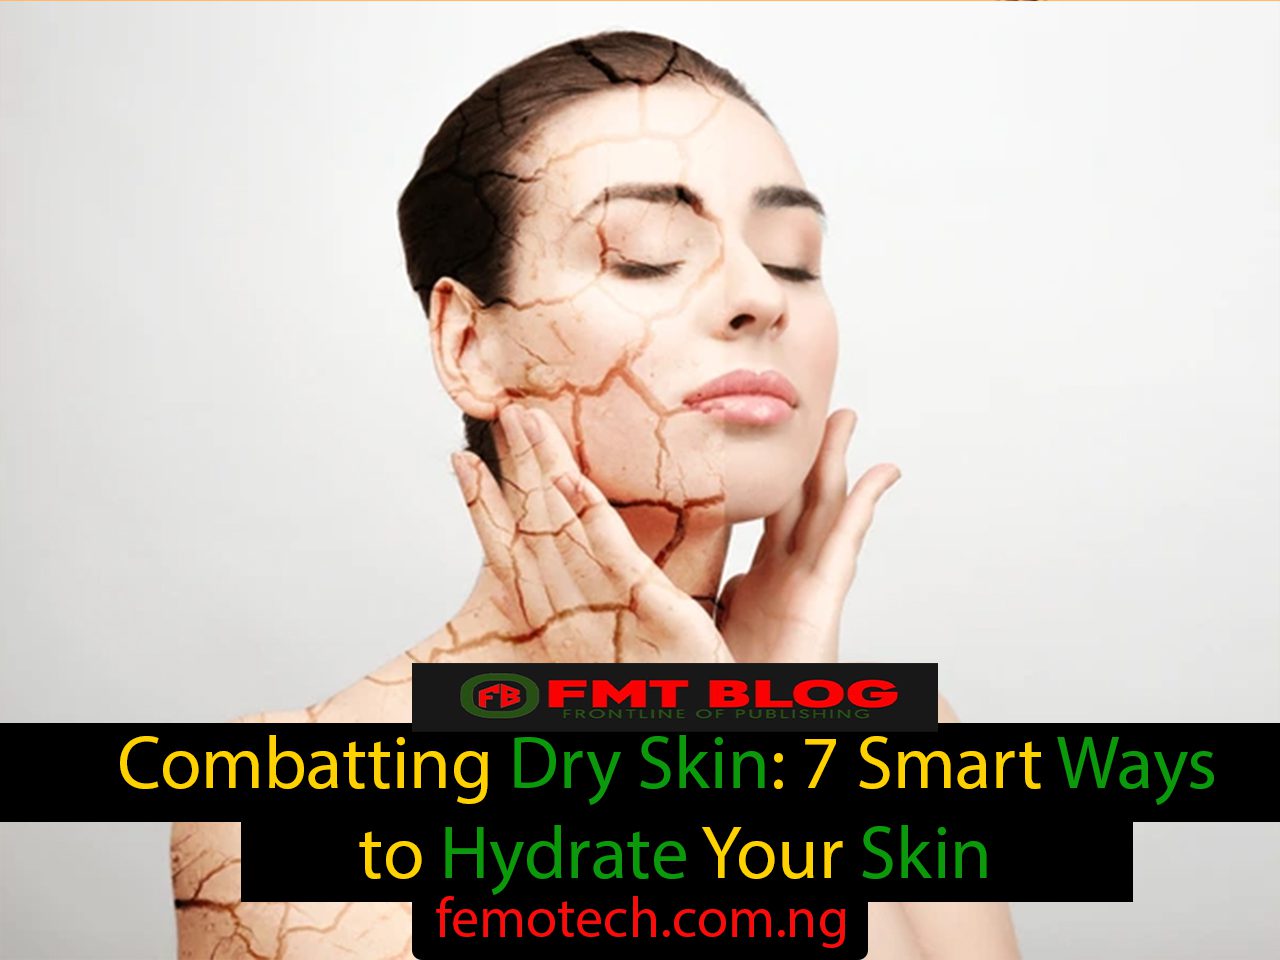 Combatting Dry Skin: 7 Smart Ways to Hydrate Your Skin